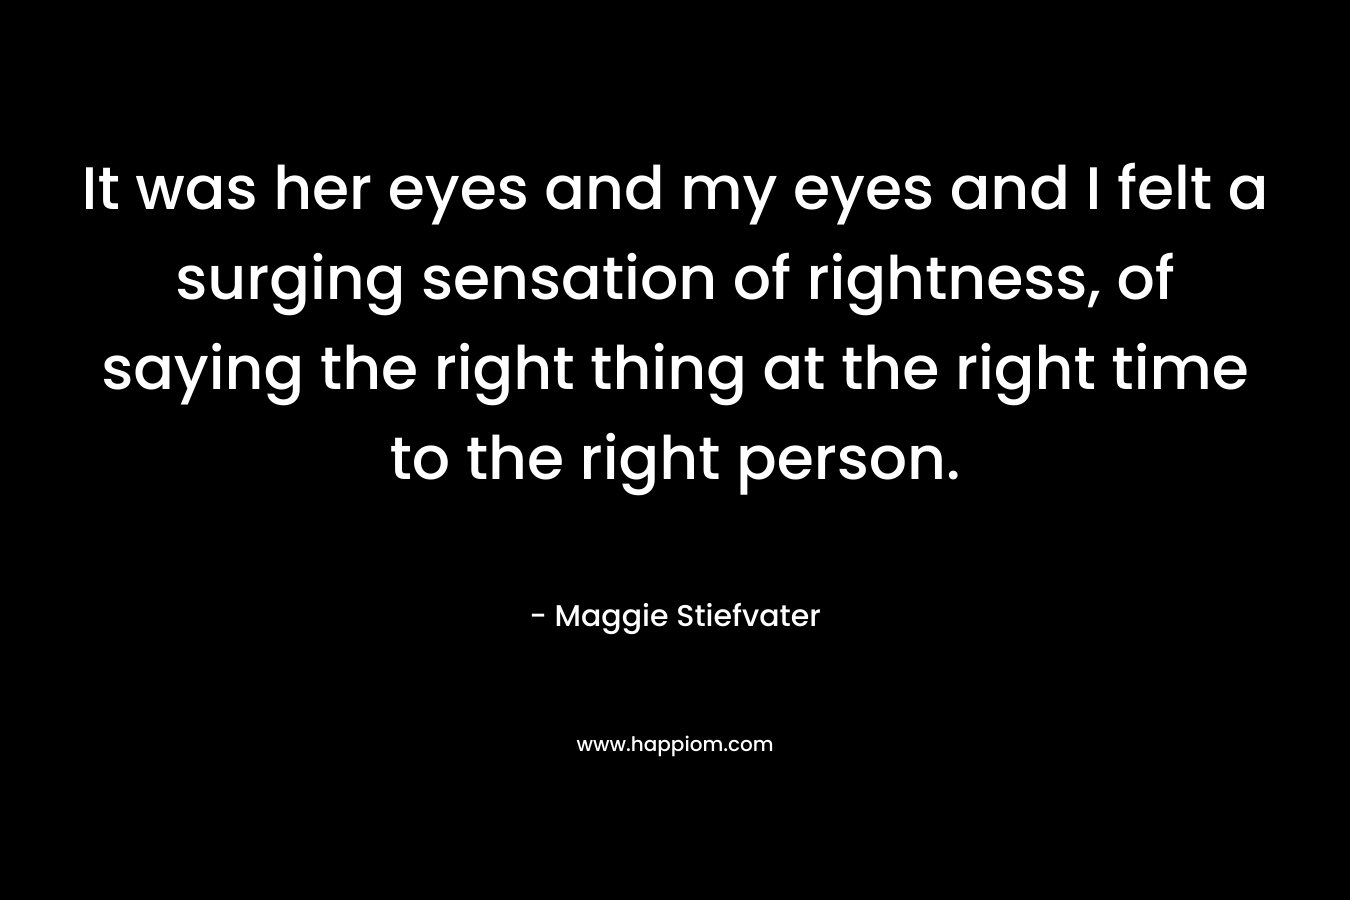 It was her eyes and my eyes and I felt a surging sensation of rightness, of saying the right thing at the right time to the right person.